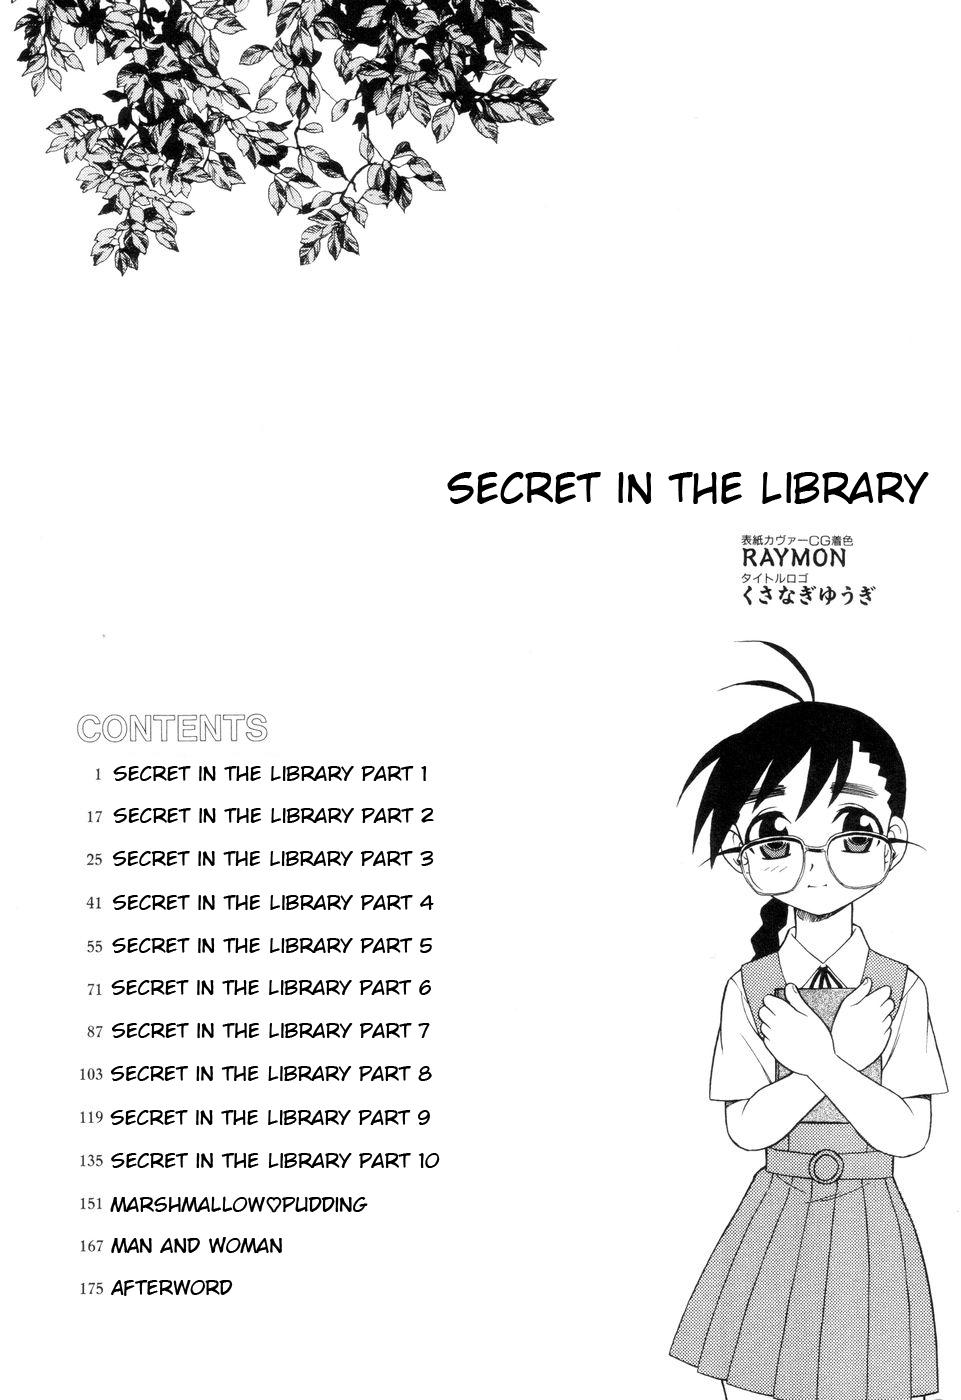 Toshoshitsu no Himitsu - Secret In Library. | Secret In The Library 4